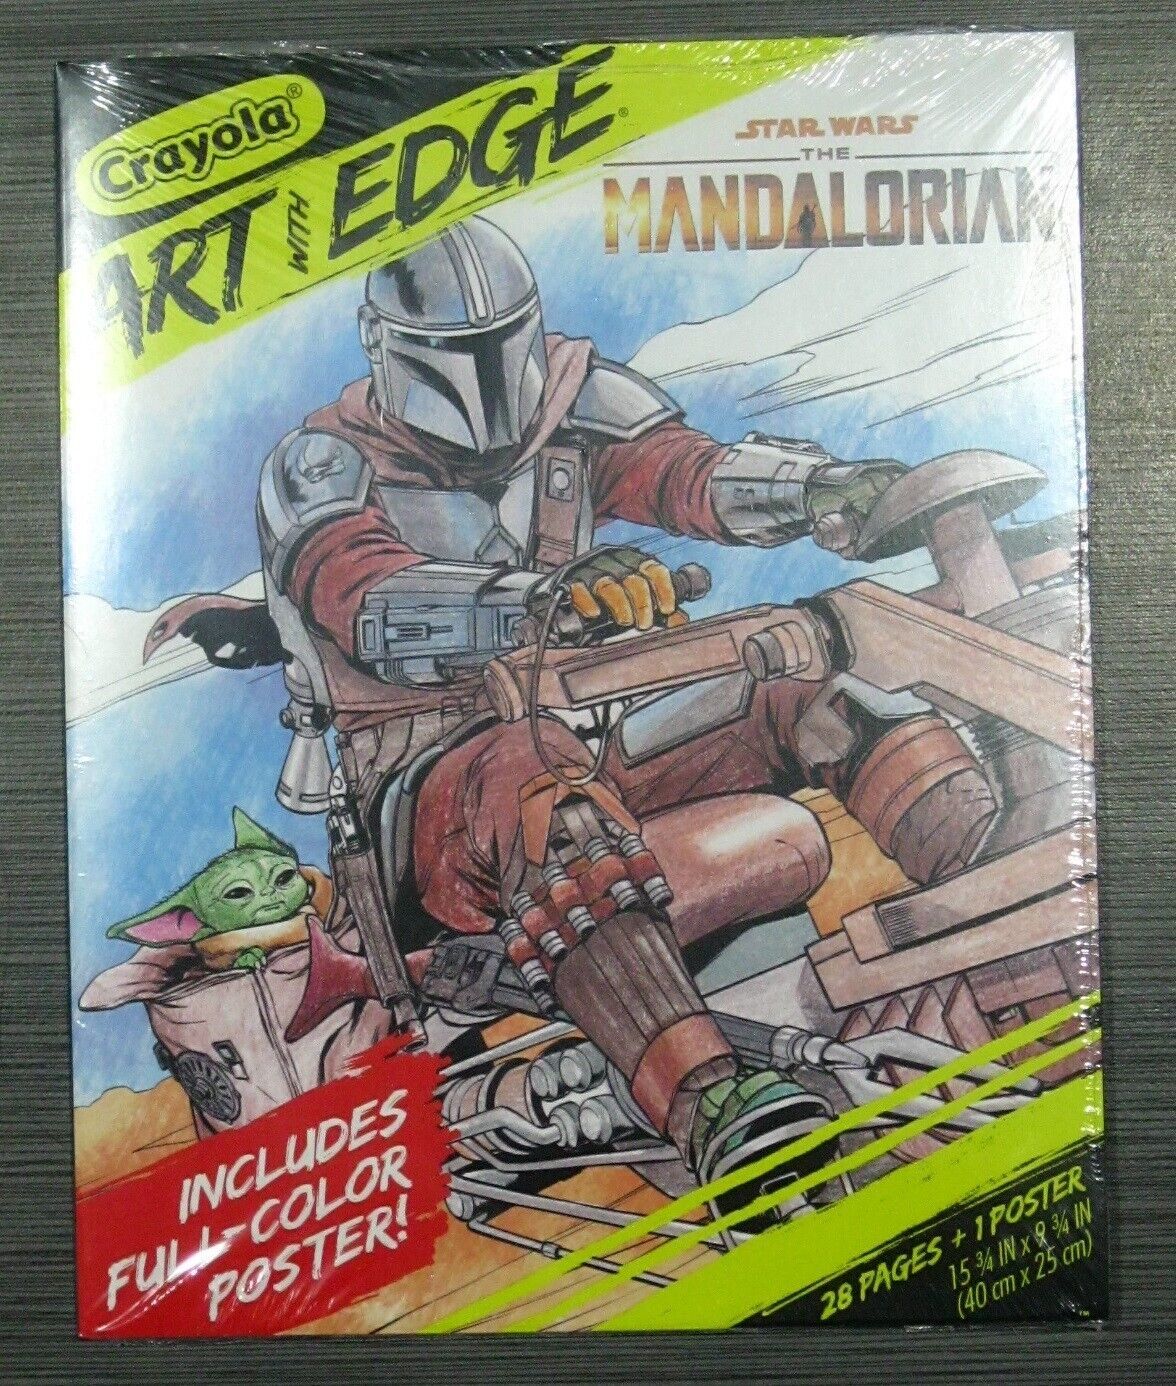 Primary image for CRAYOLA ART with Edge Star Wars The Mandalorian 28 Pages Coloring Book & POSTER